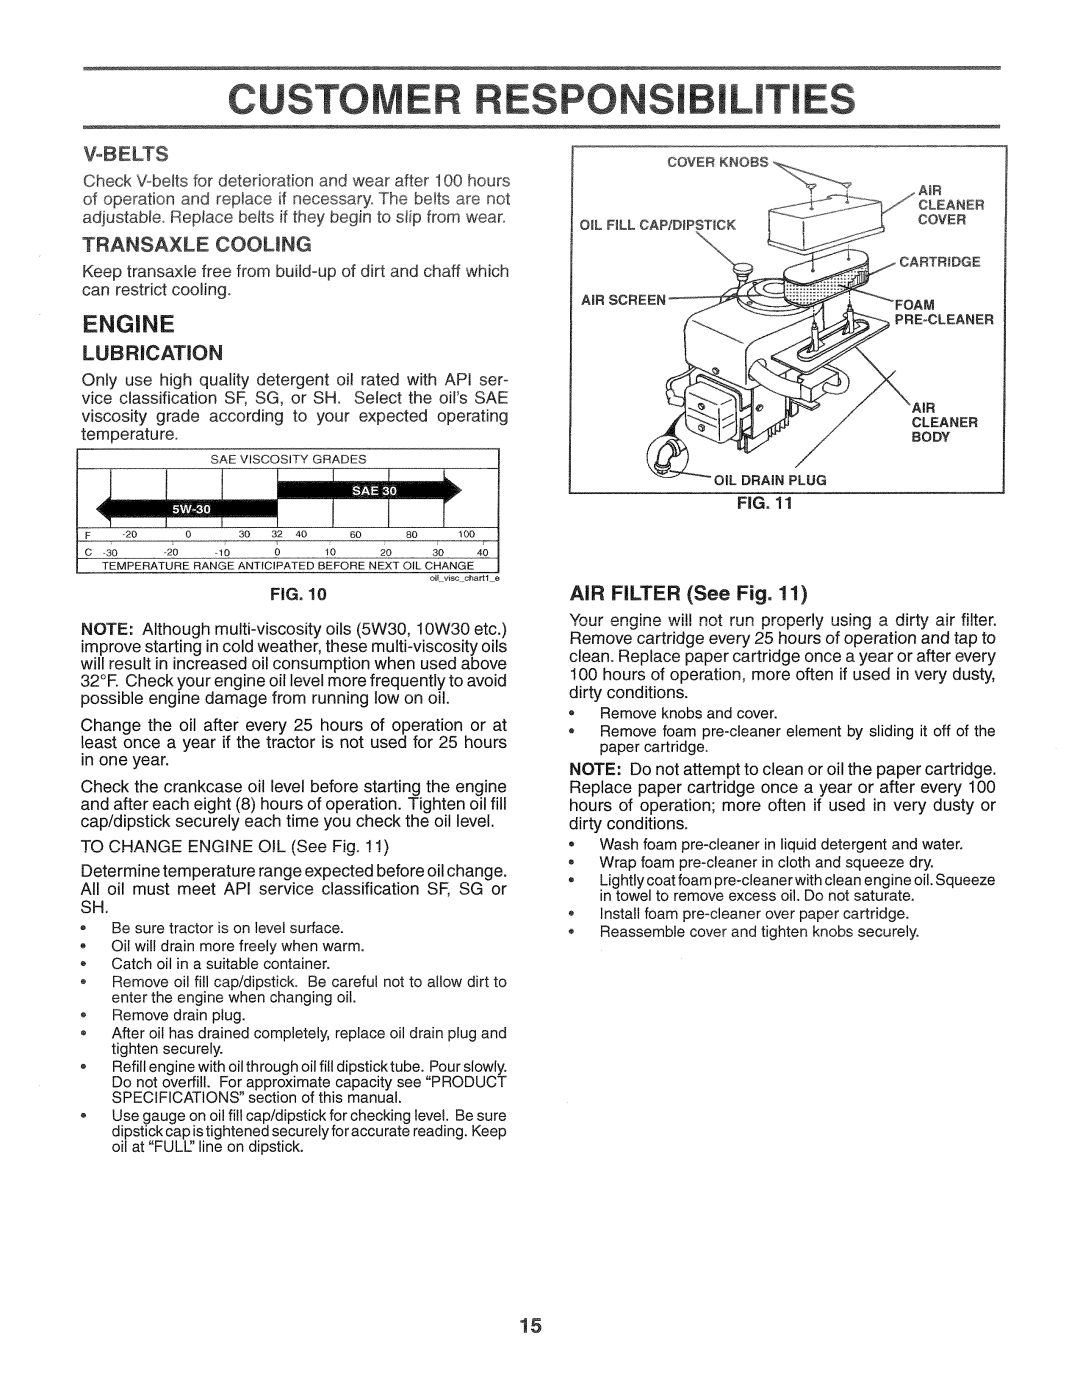 Weed Eater 169437, HDT1338A manual 